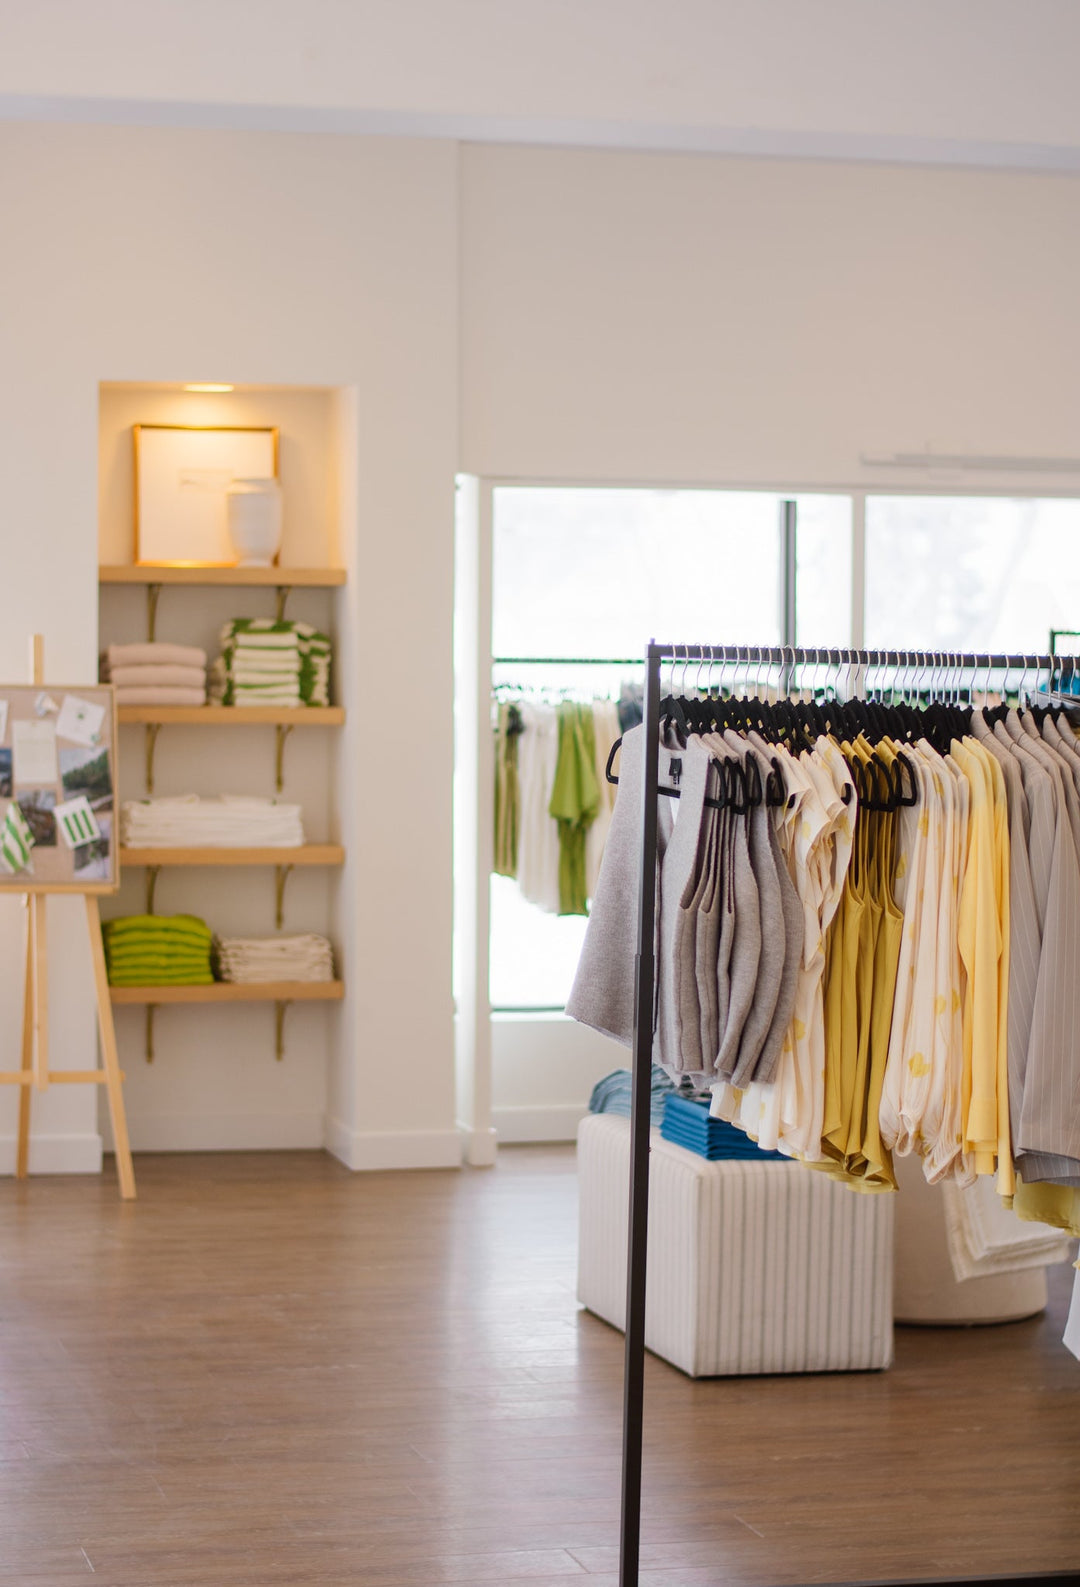 recent photo of inside a boutique